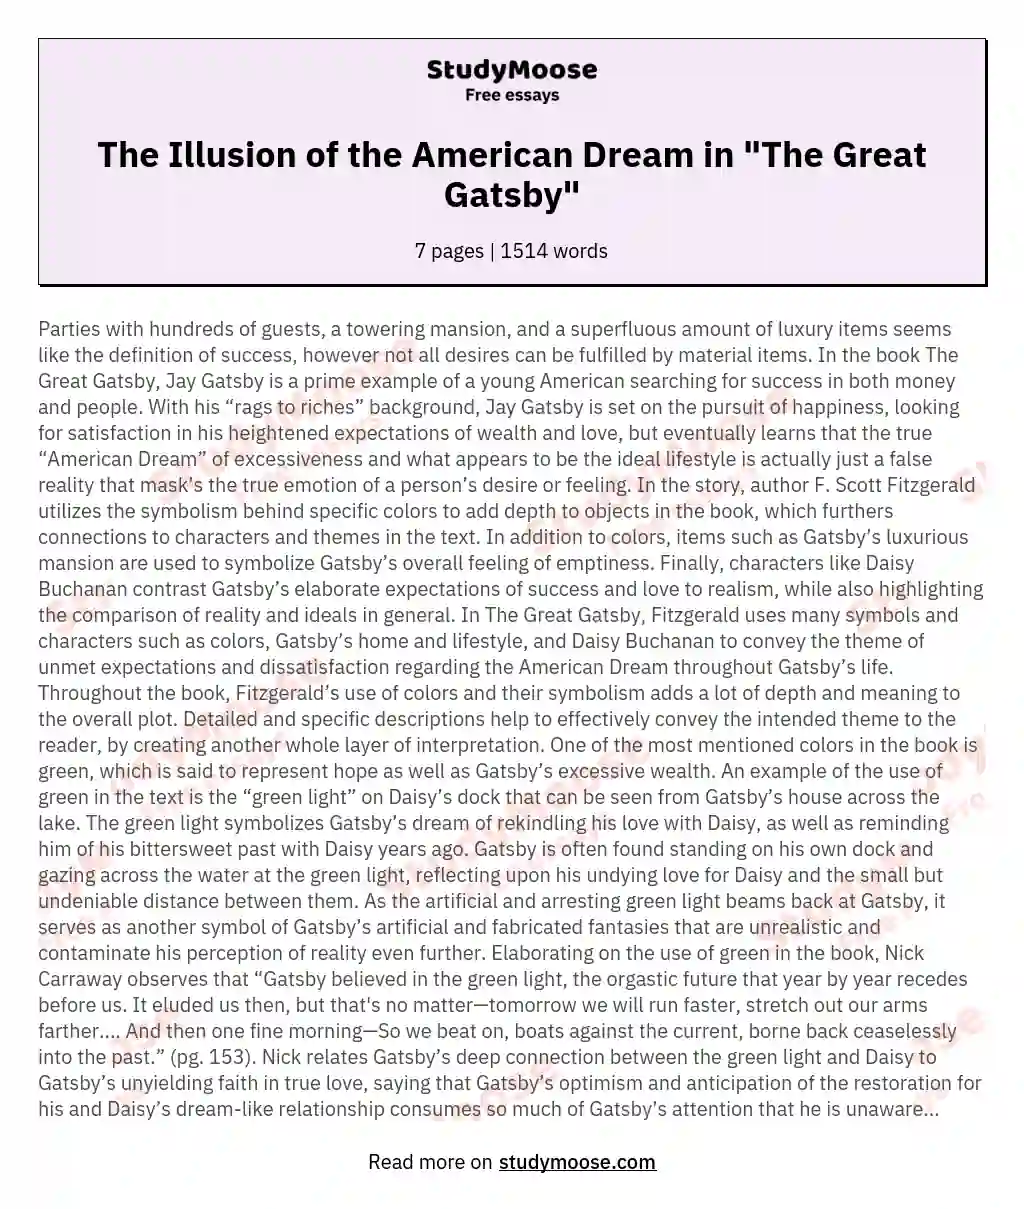 The Illusion of the American Dream in "The Great Gatsby"